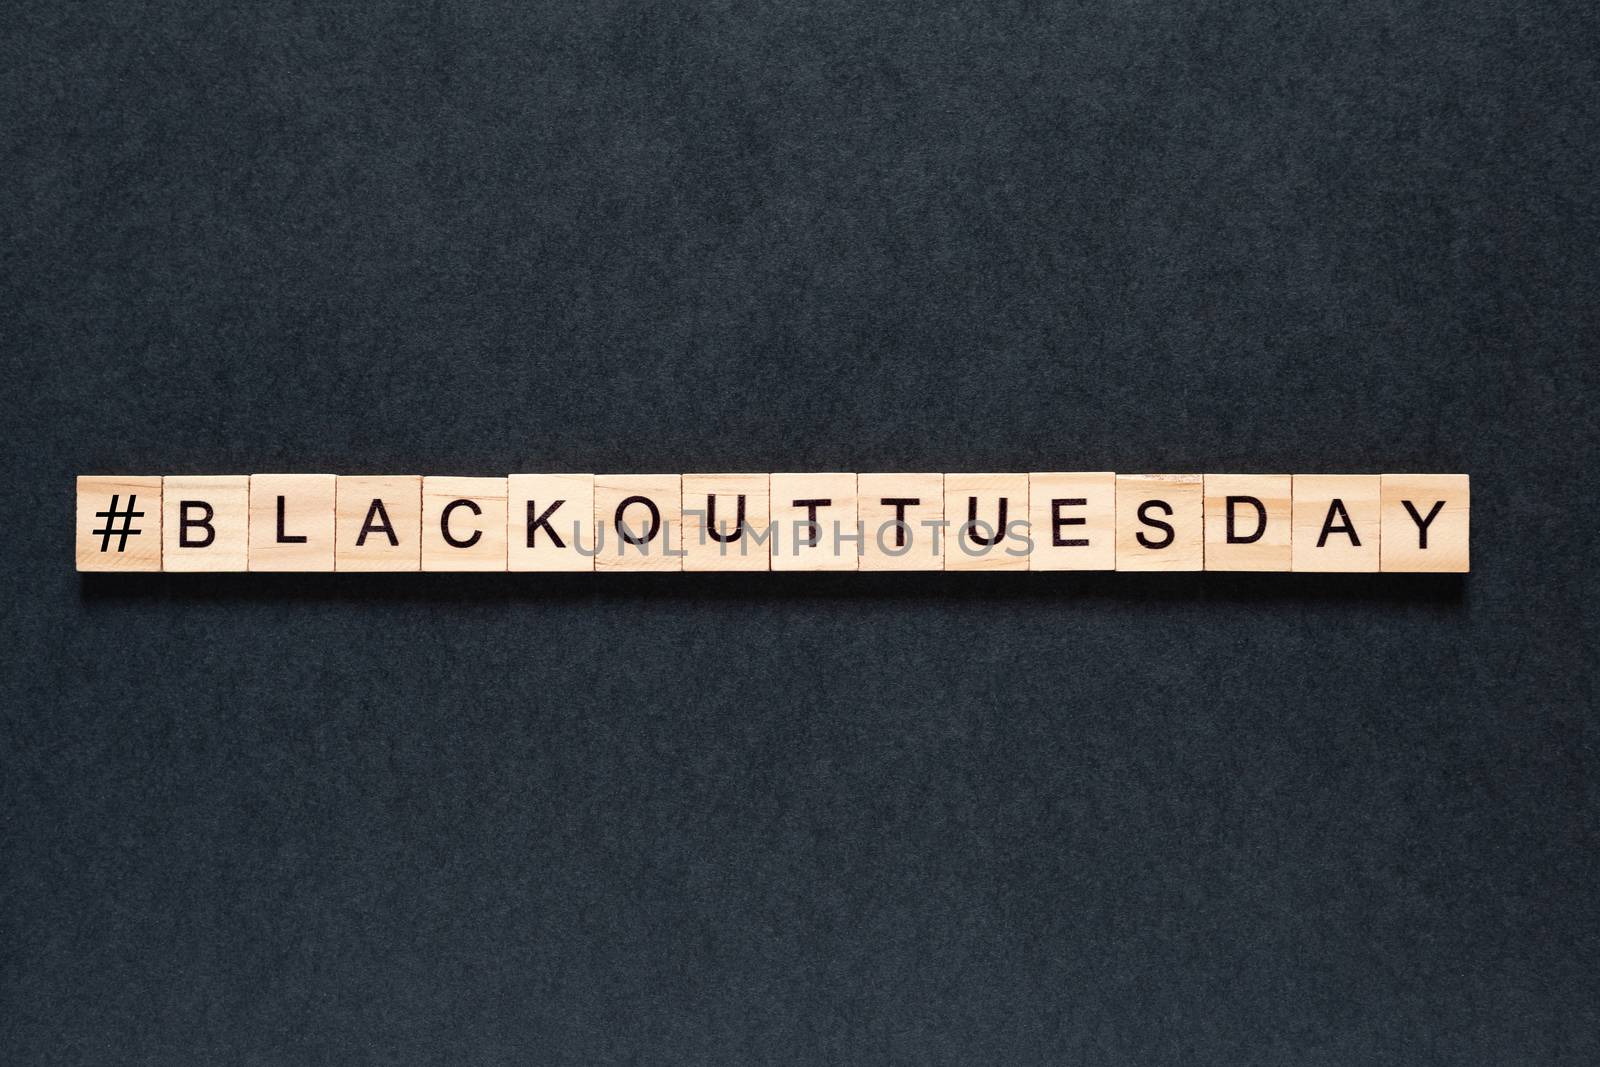 Blackout tuesday inscription on a black background. Black lives matter, blackout tuesday 2020 concept. unrest. rallies. brigandage. marauders. looting. by Pirlik